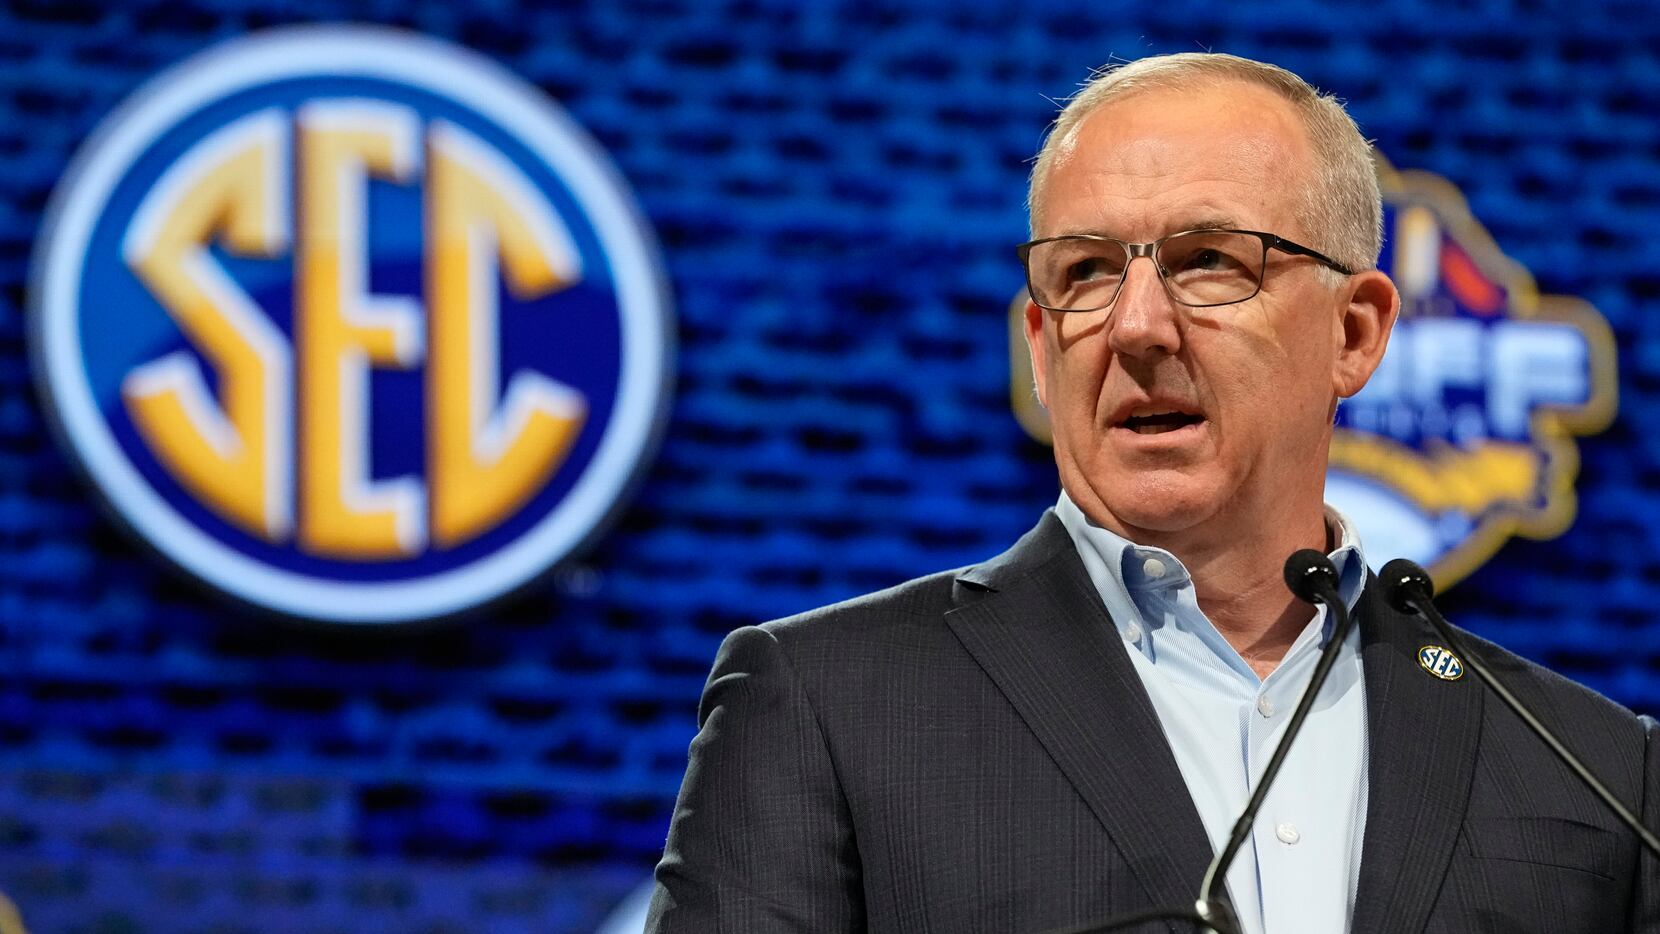 SEC Commissioner Greg Sankey speaks during the NCAA college football Southeastern Conference...